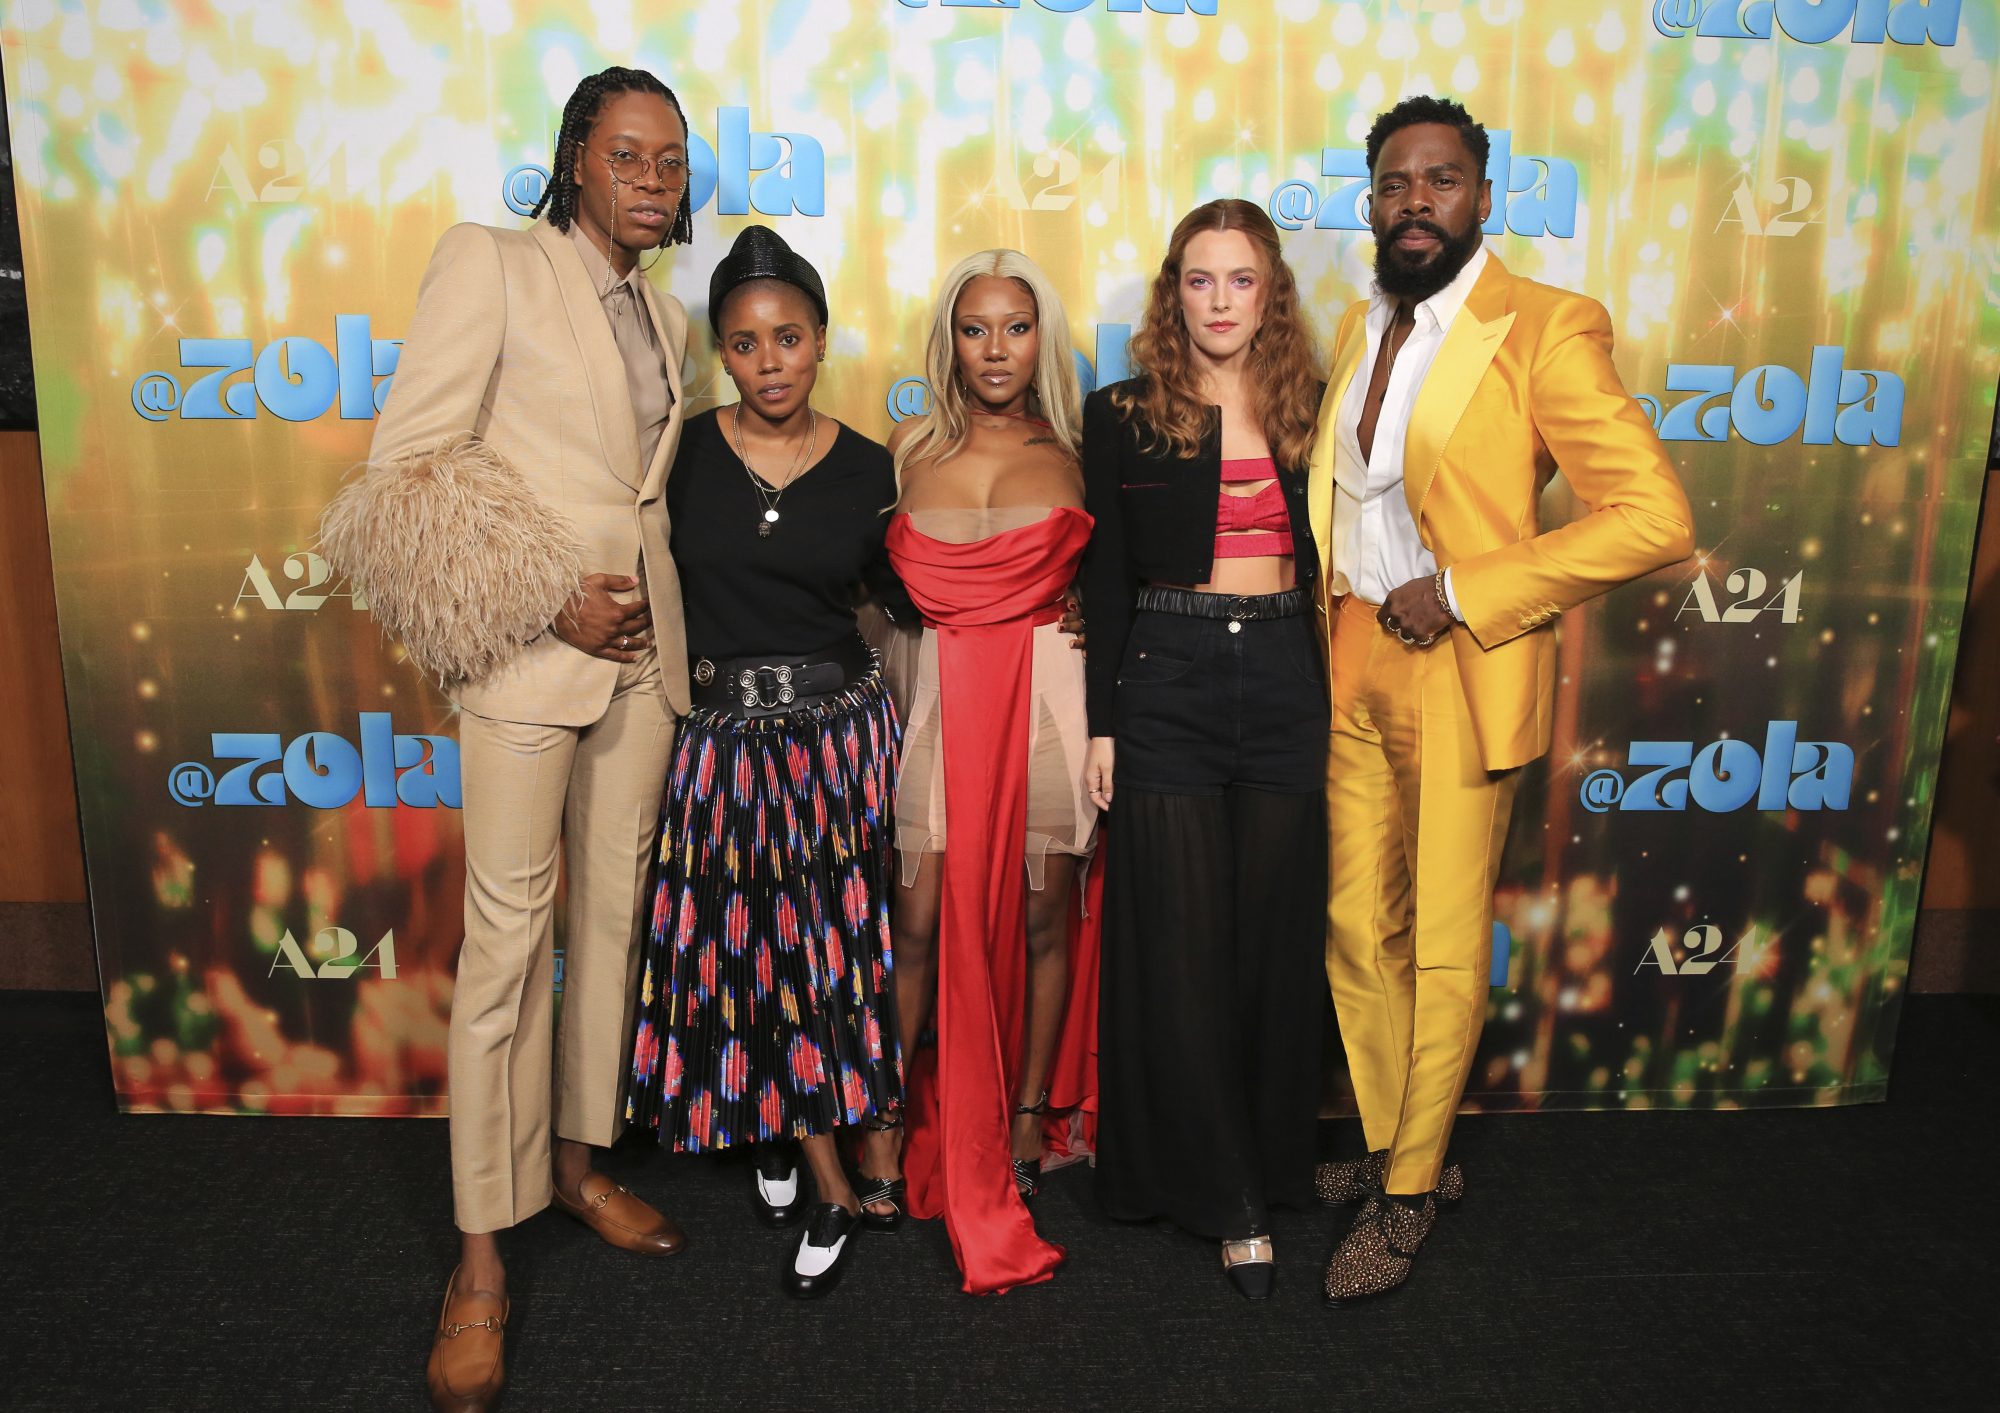 Co-writer Jeremy O. Harris, co-writer/director Janicza Bravo, executive producer A'Ziah Zola King, Riley Keough and Colman Domingo seen at Los Angeles special screening of A24's ZOLA on Tuesday, June 29, 2021, in Los Angeles. (AP Photo/Blair Raughley)